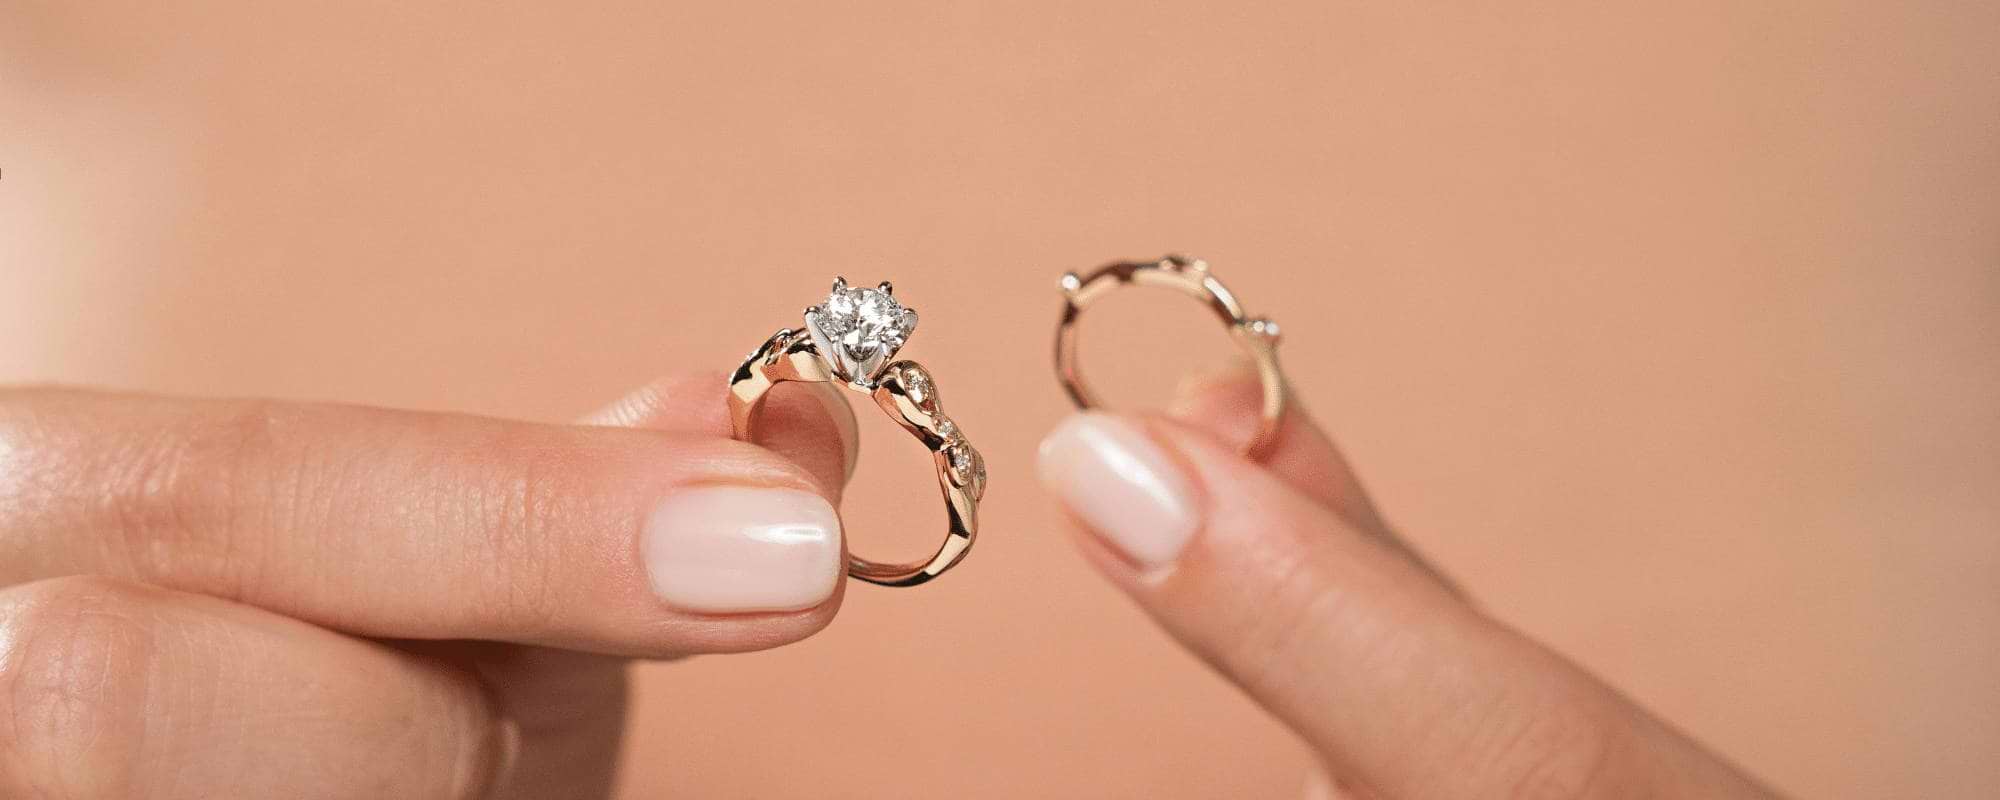 9 Inspirational Fantasy Engagement Rings that Will Charm Your Fiancée